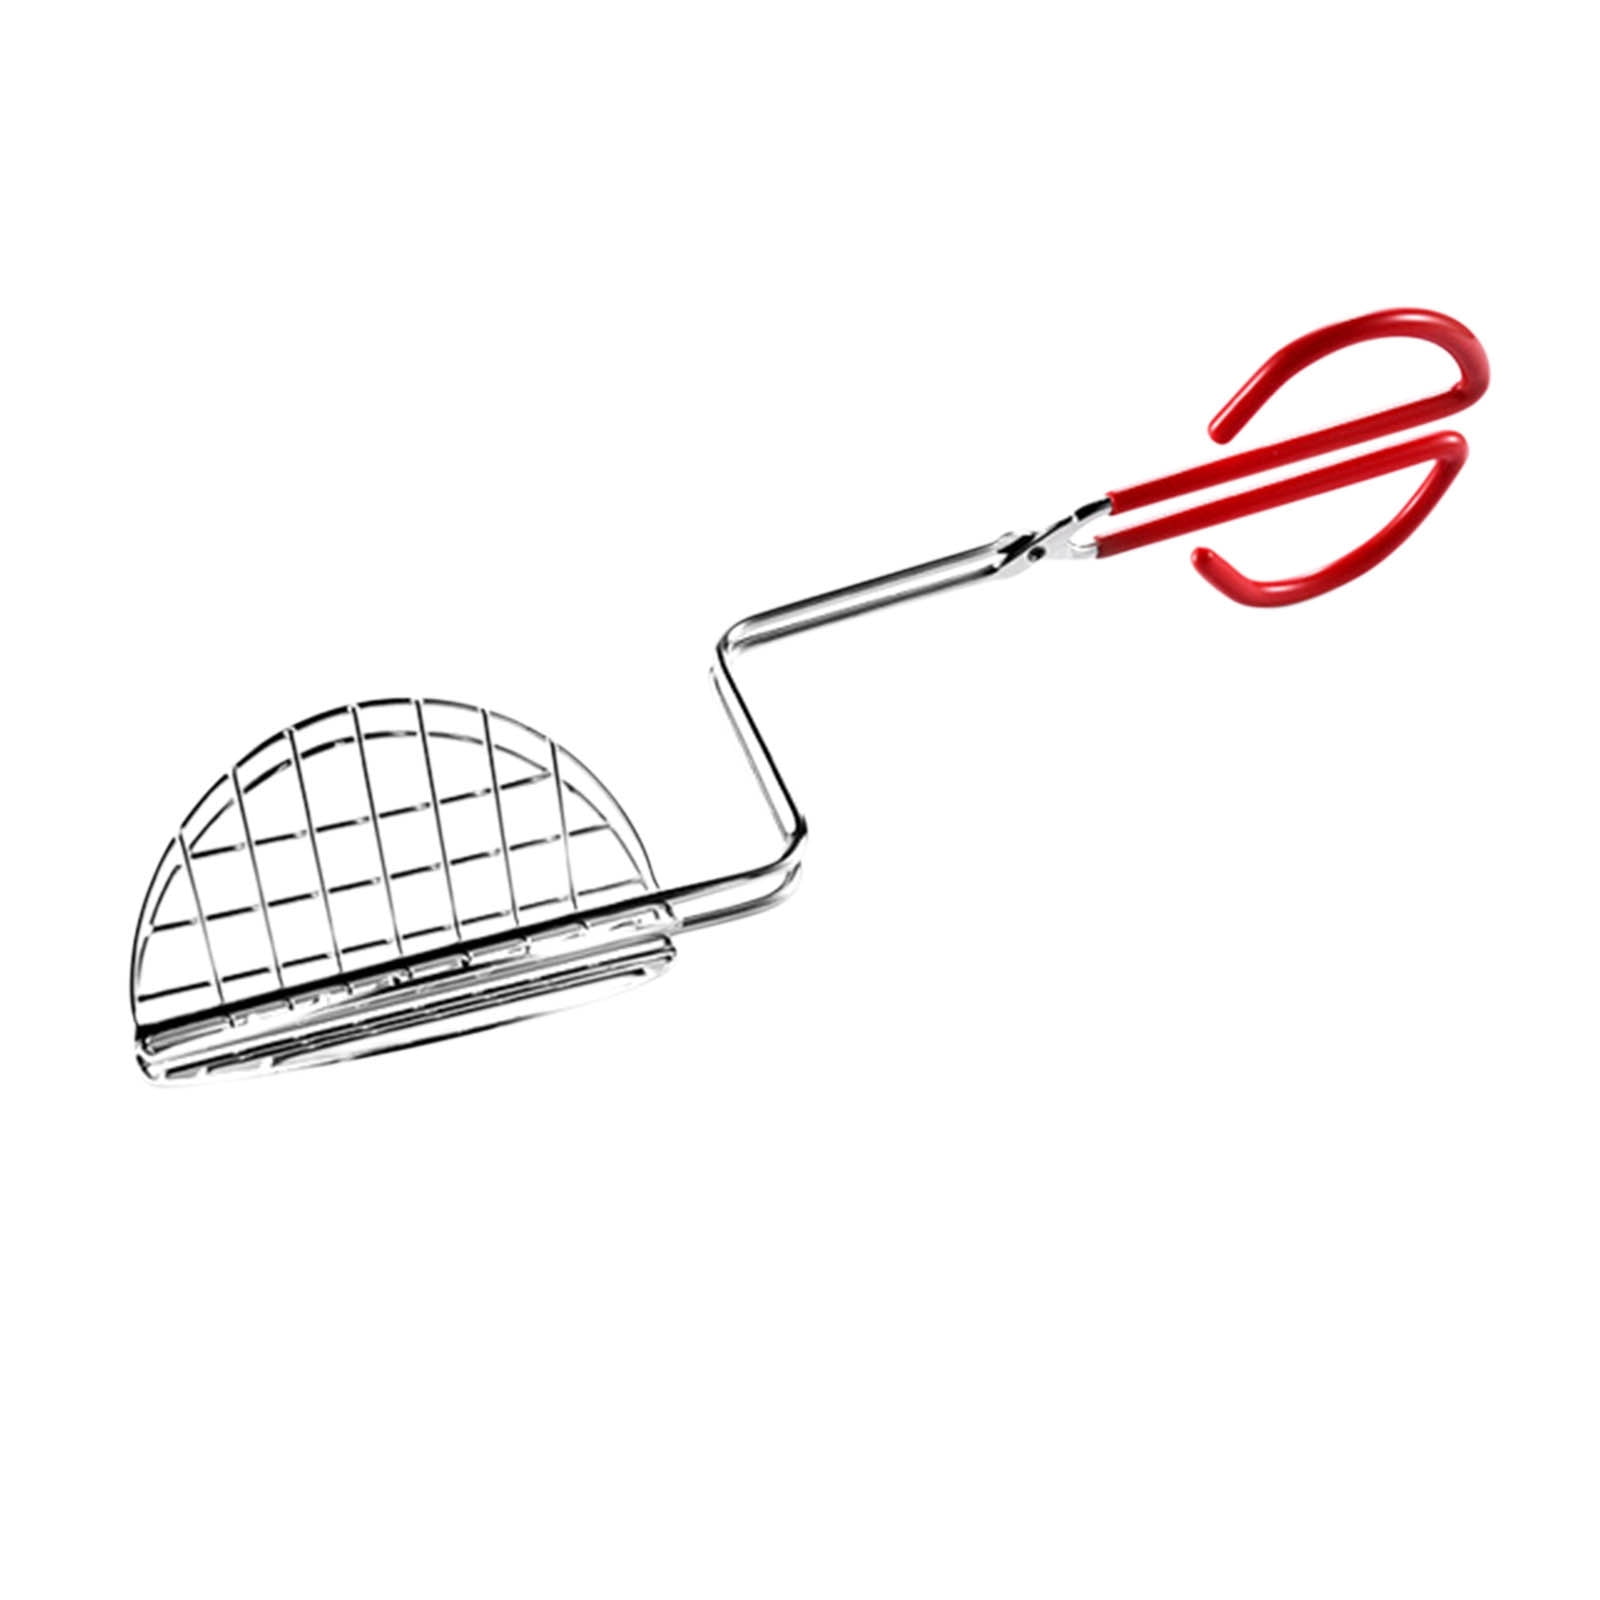 Dengmore Sales Taco Maker Press Tortilla Fryer Tongs Taco Holders Stainless  Steel Tortilla Crust V shaped Setting Clip Potato Chip Holder Taco Tongs  With Rubber Handle 